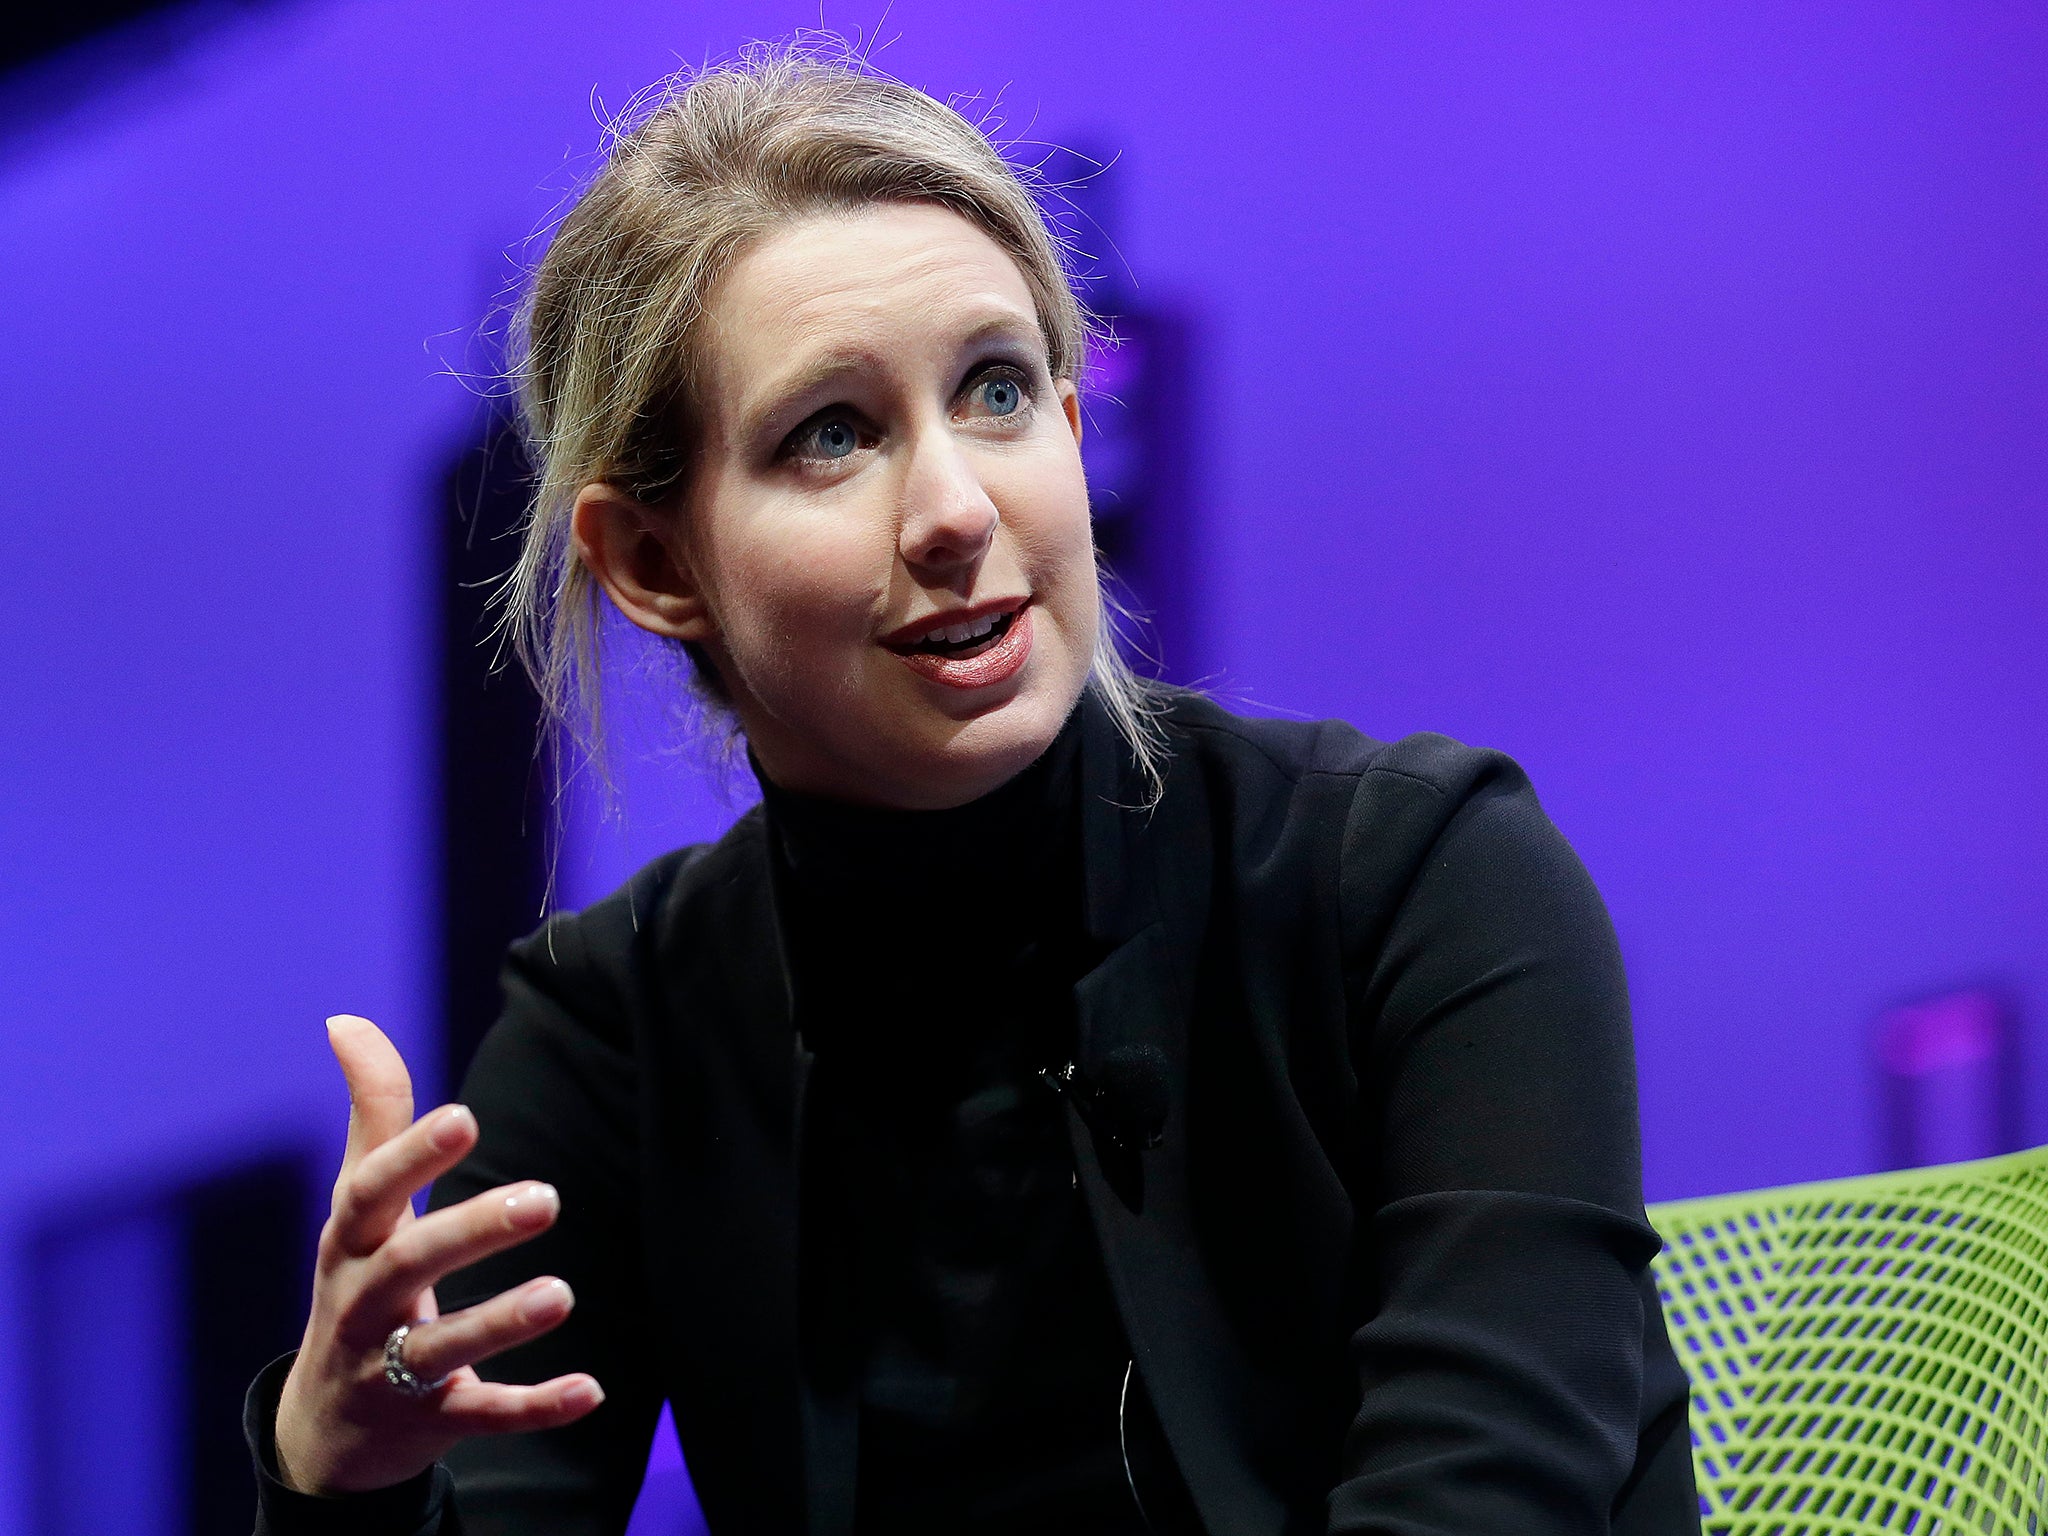 Founder Elizabeth Holmes had raised $700m in funding, including from Rupert Murdoch and Oracle co-founder Larry Ellison